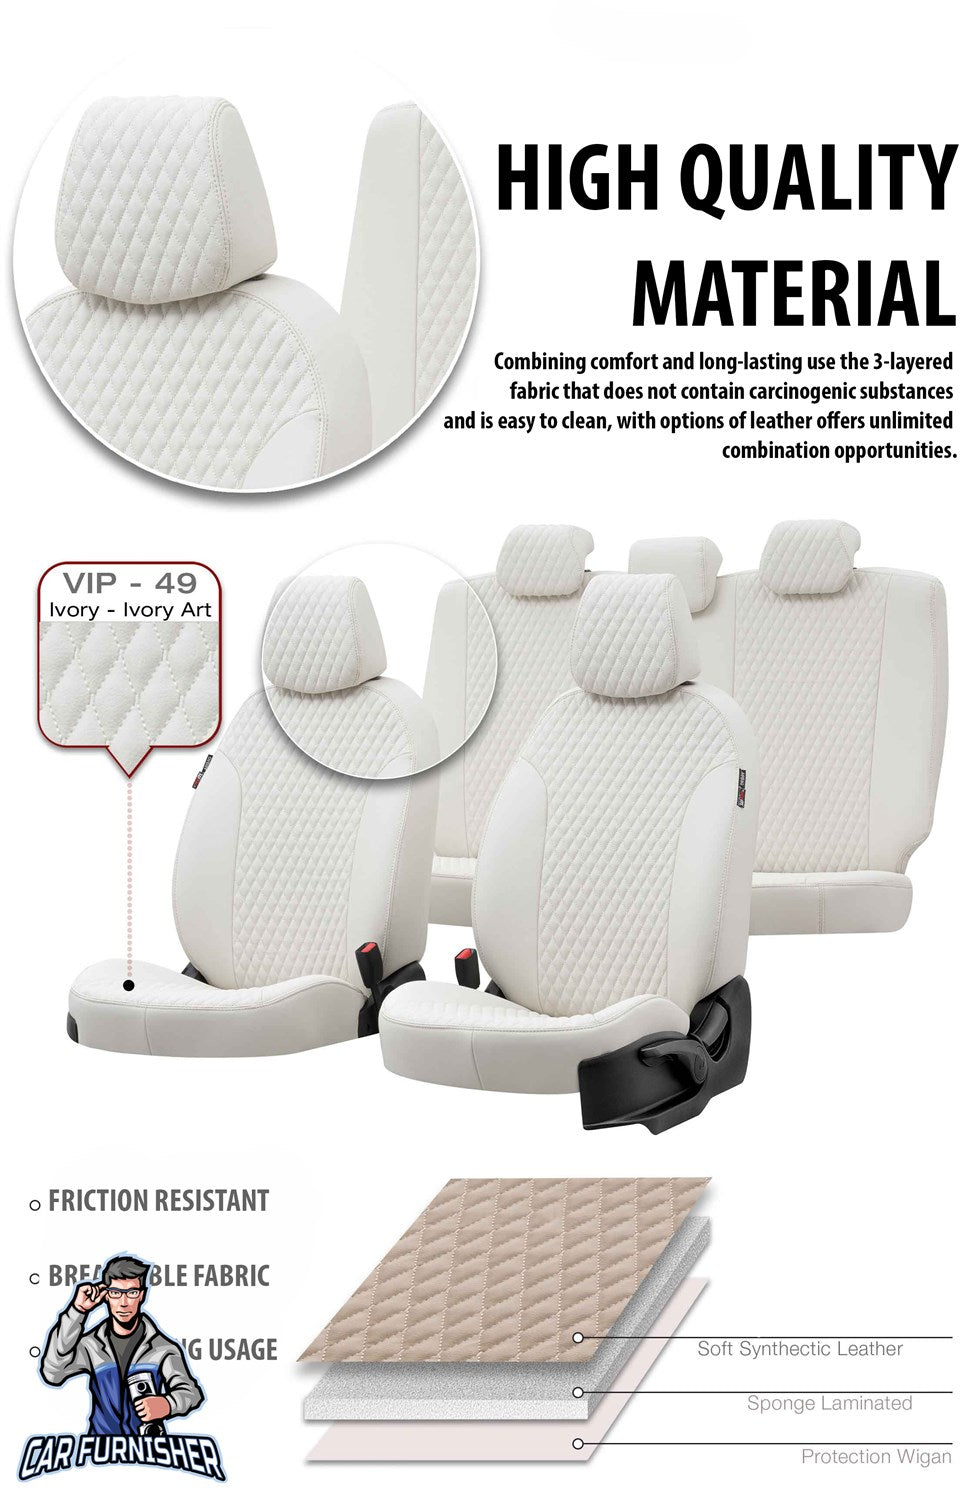 Nissan Pulsar Seat Covers Amsterdam Leather Design Ivory Leather